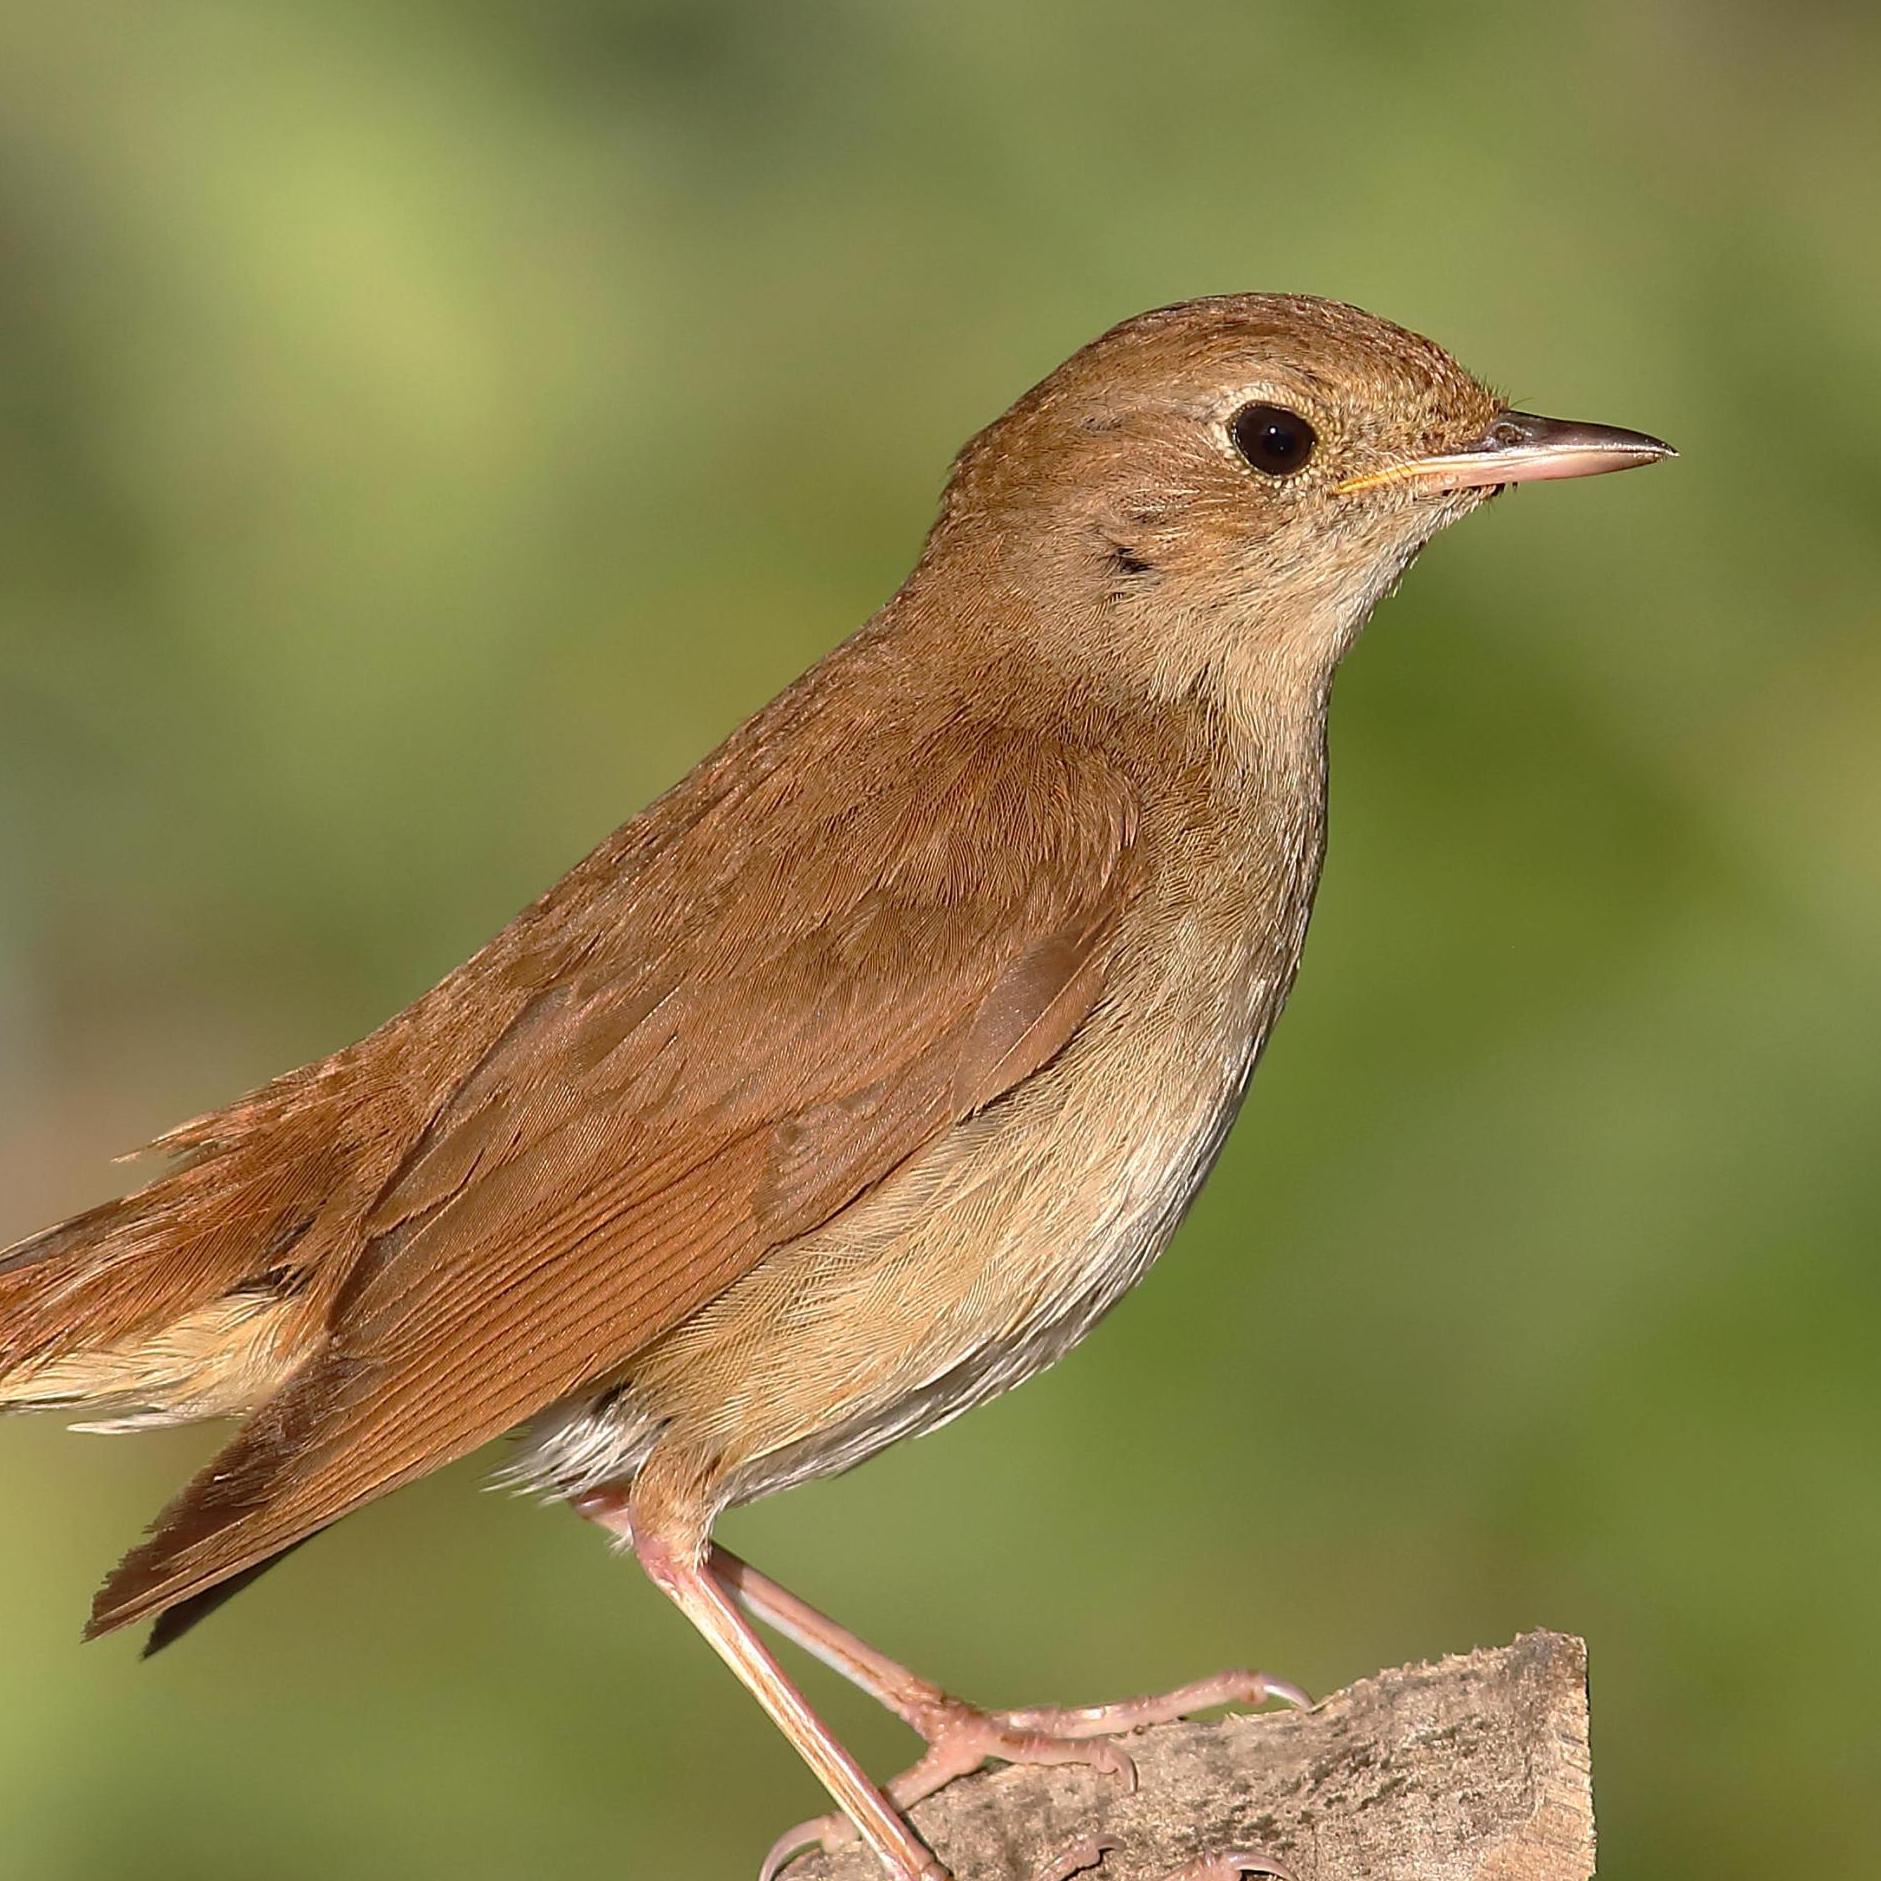 There are fewer than 5,000 singing male nightingales in England, largely restricted to the southeast